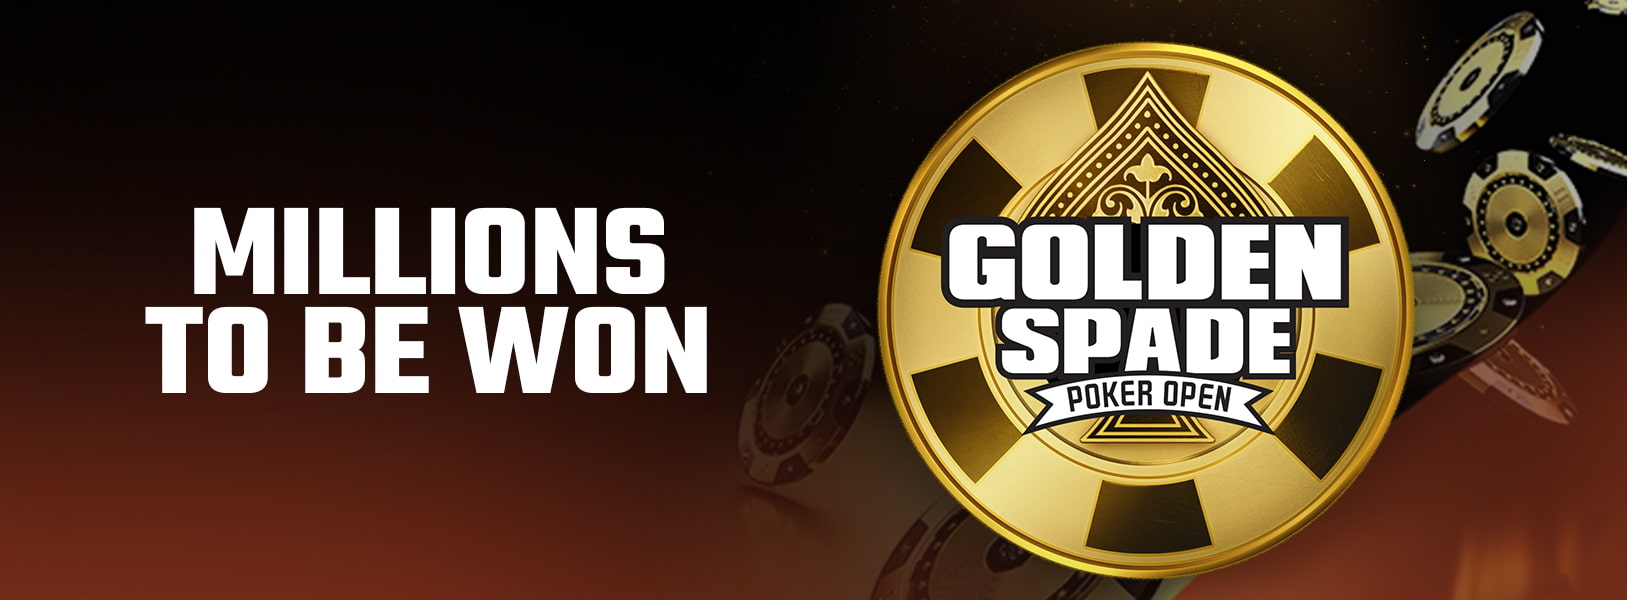 Deposit and Learn Poker and Win Over 10 Million at GSPO.